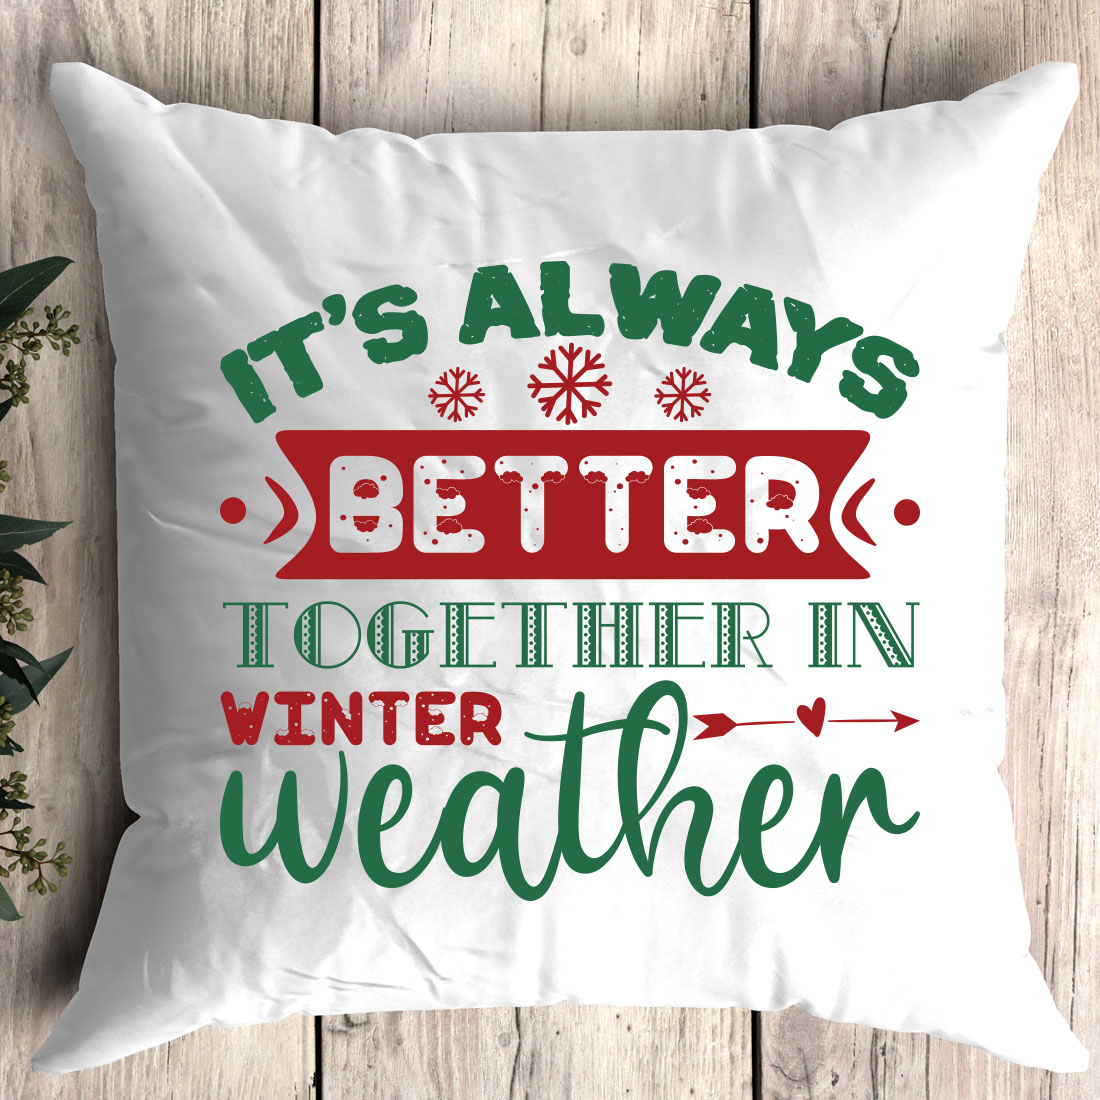 Pillow that says it's always better together in winter weather.